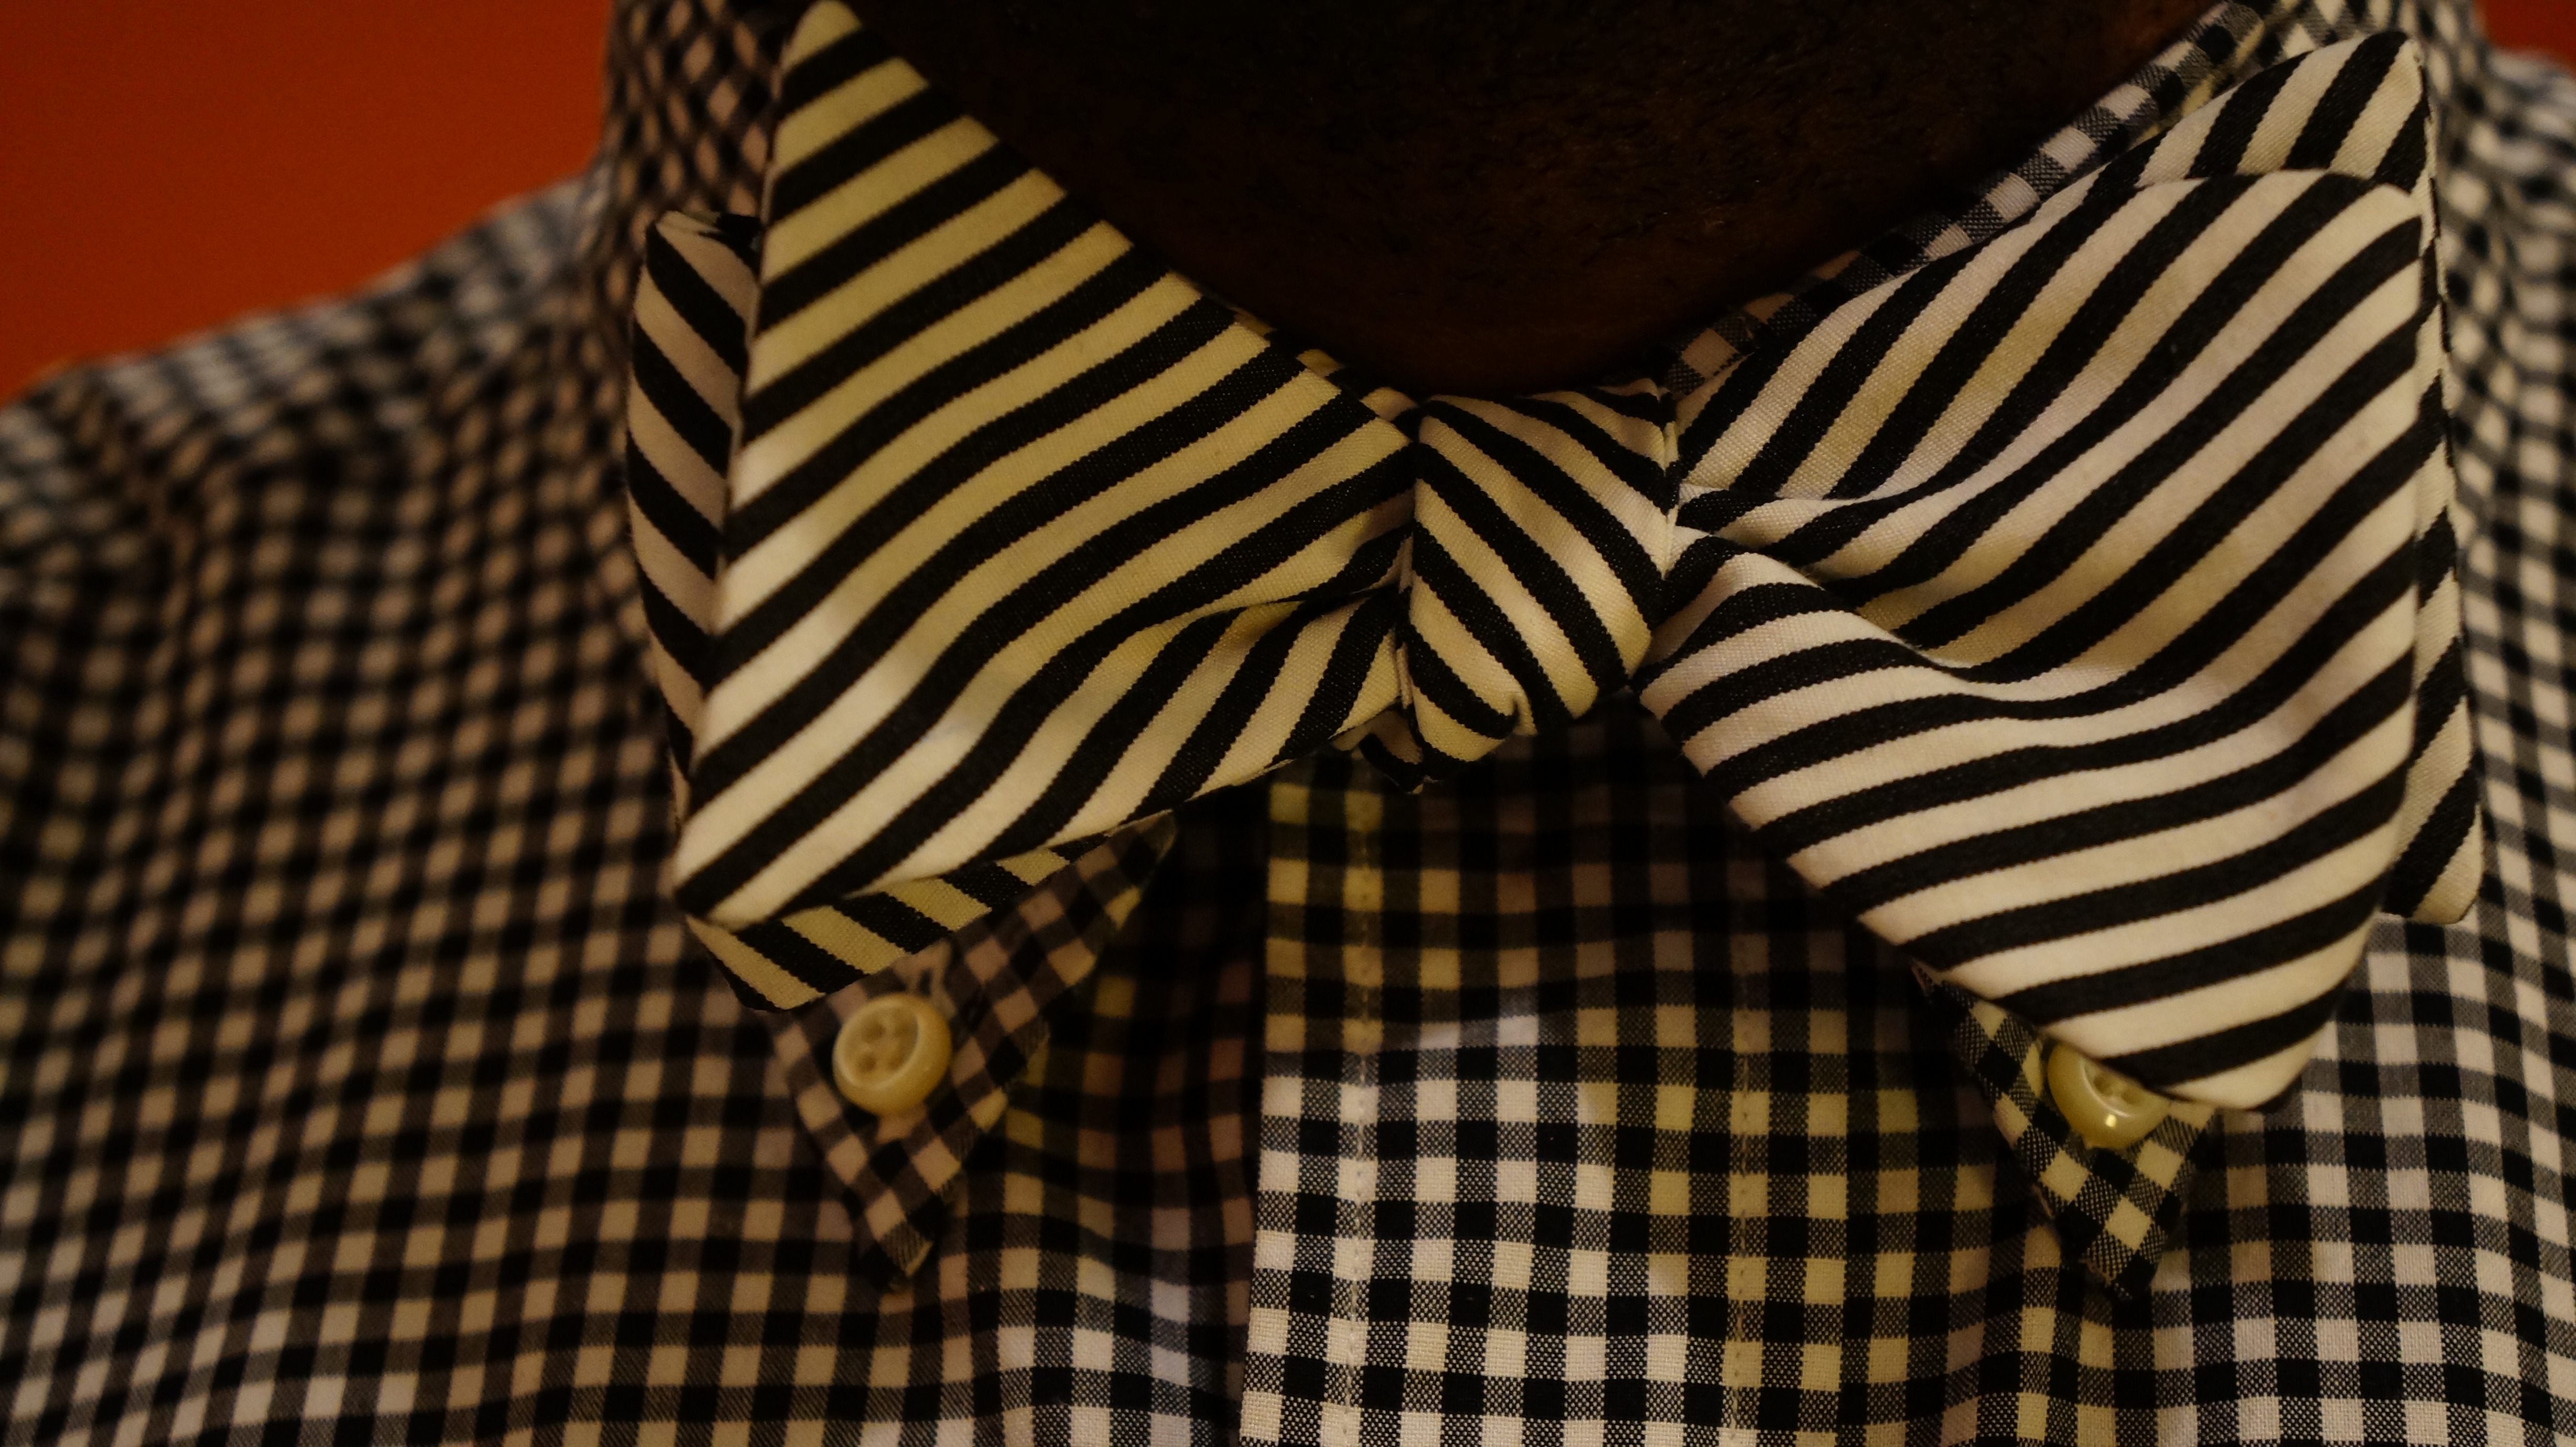 The Bow Tie Flow Meets Ted Rubin